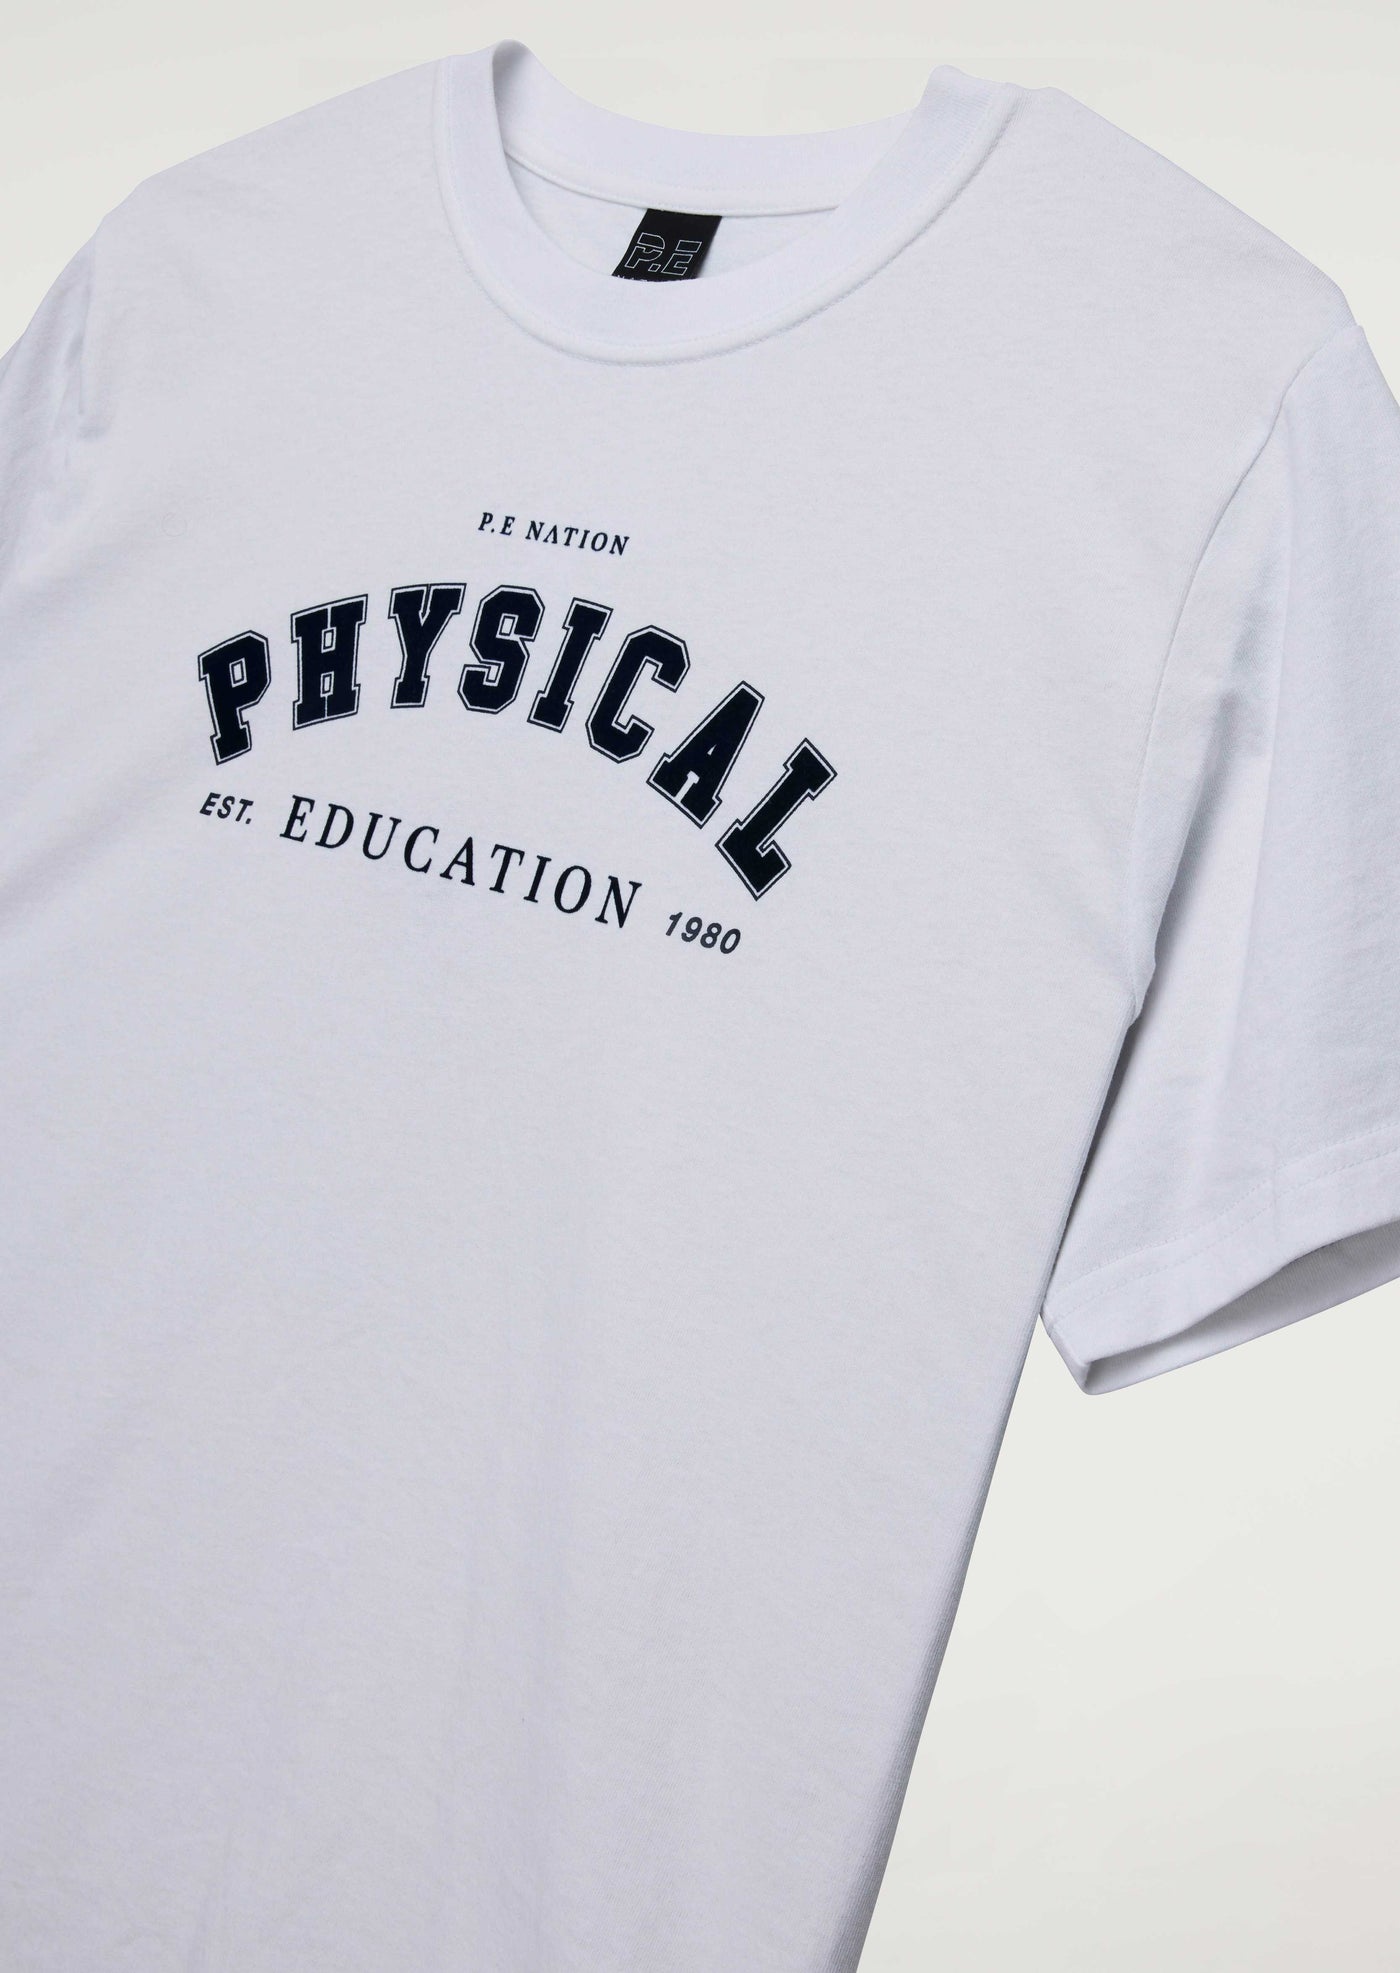 PHYSICAL TEE IN OPTIC WHITE